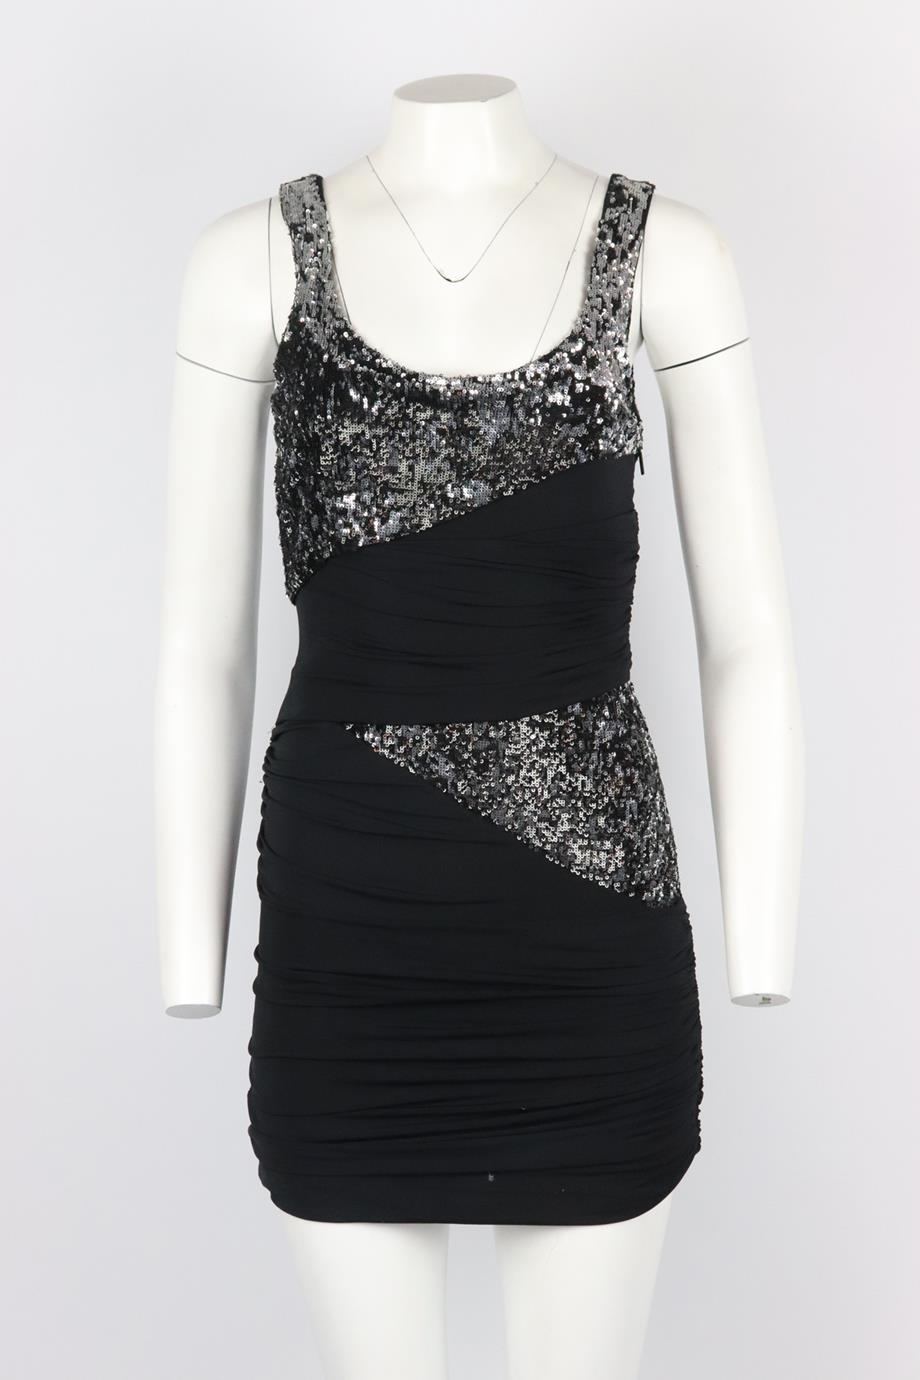 ROBERTO CAVALLI RUCHED SEQUINED STRETCH JERSEY MINI DRESS IT 38 UK 6